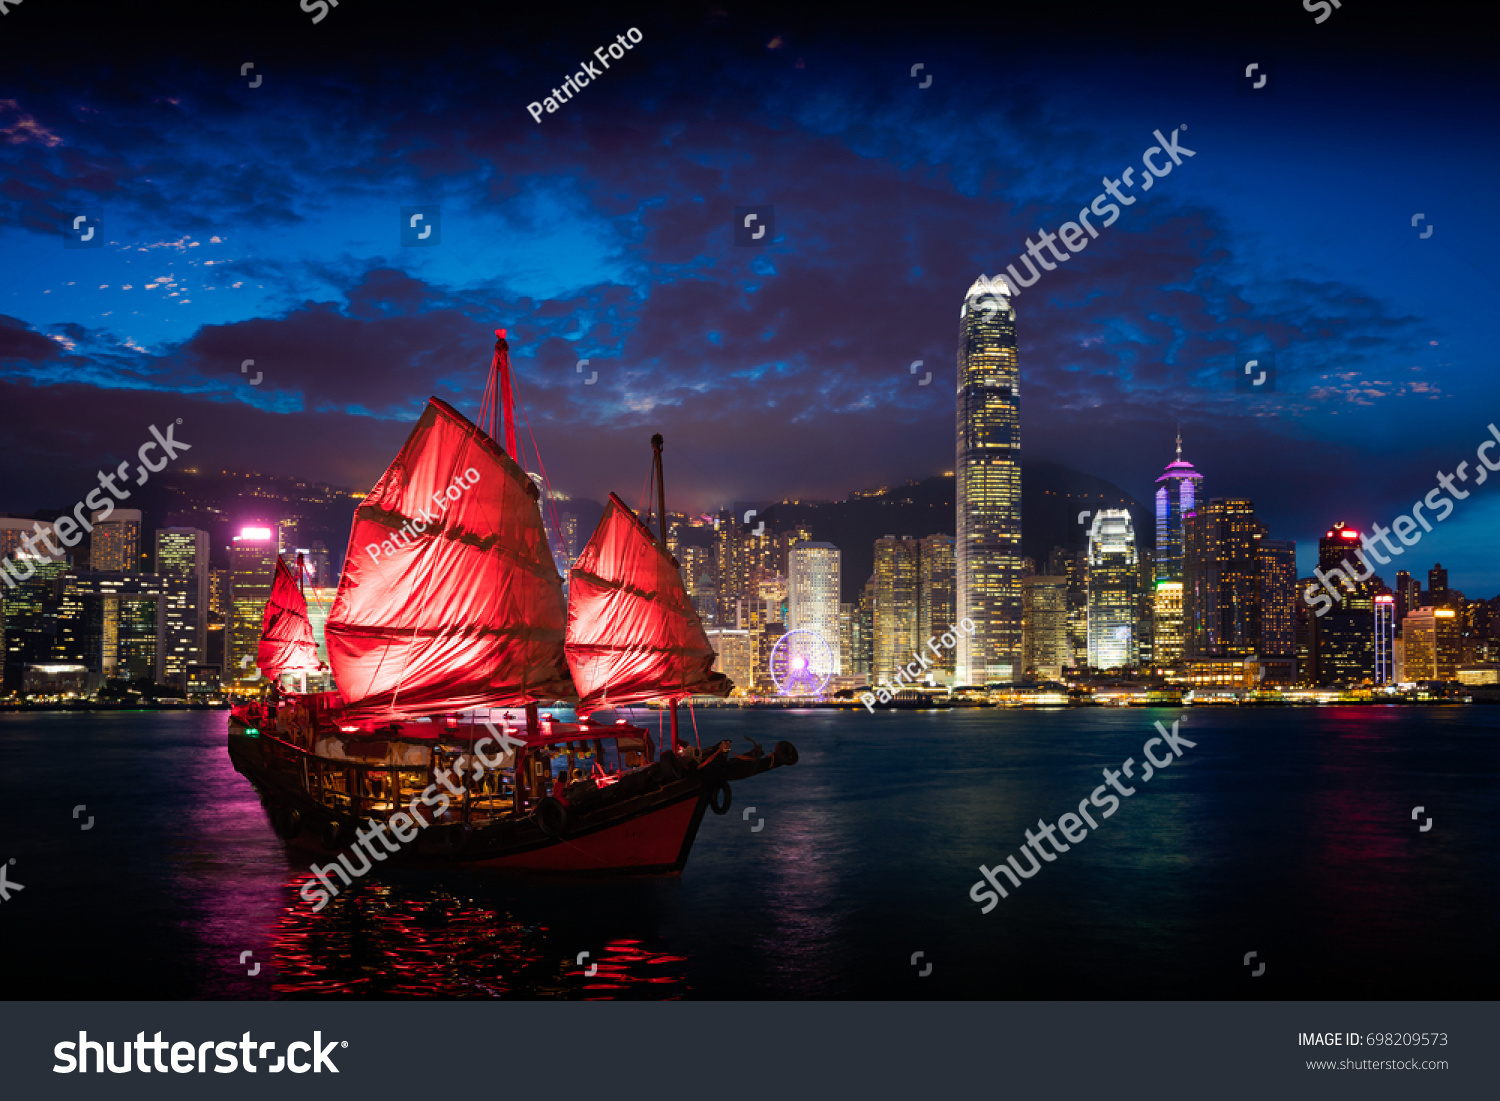 Victoria Harbour Hong Kong night view with junk ship on foreground #698209573